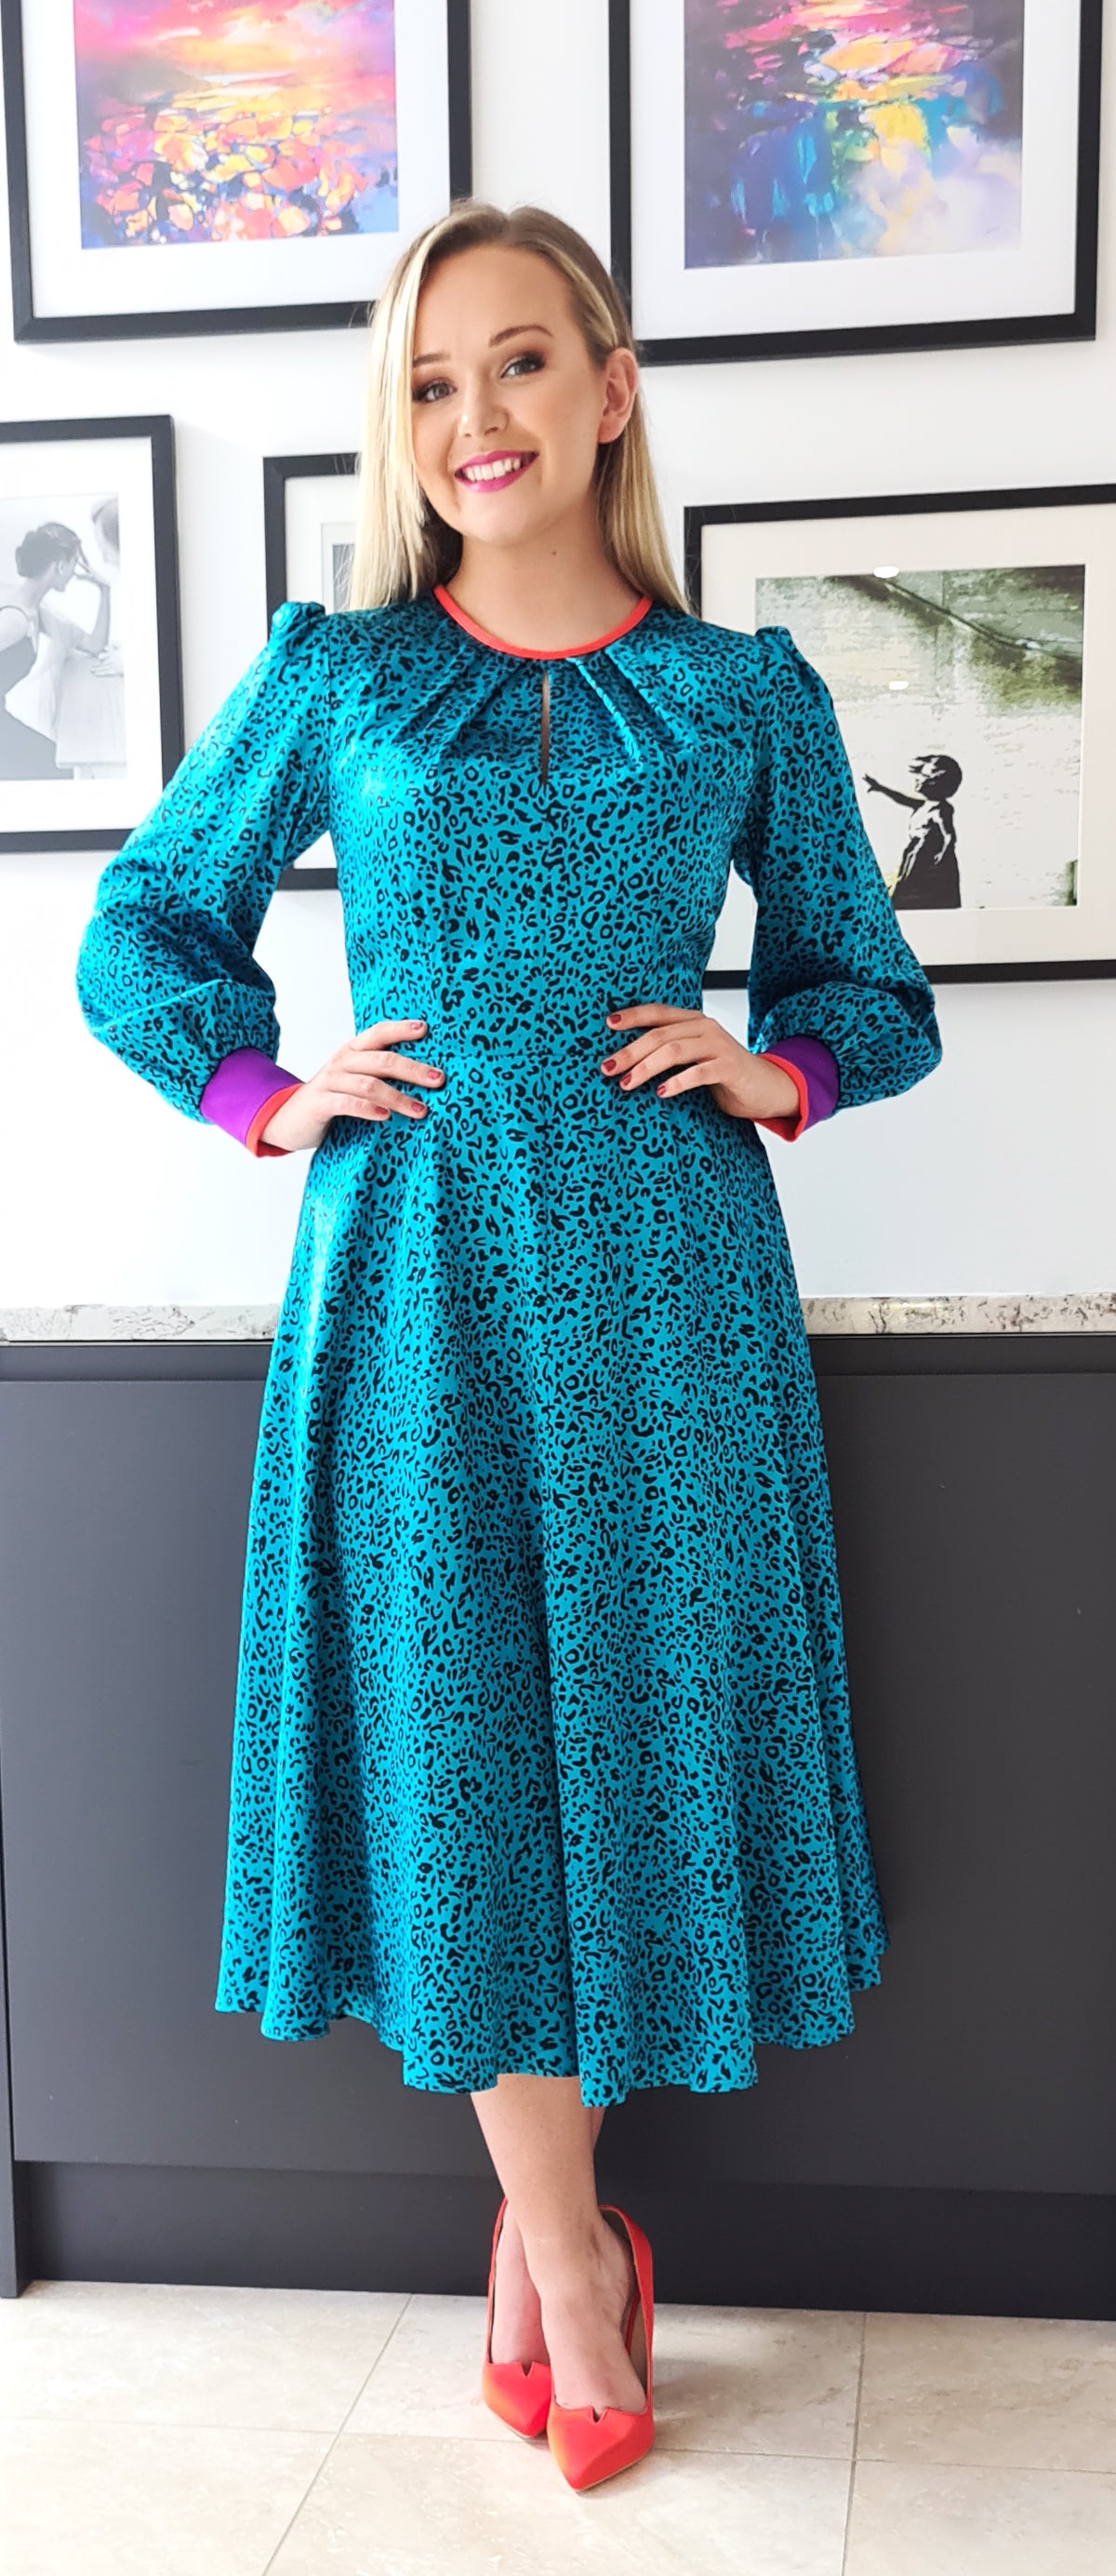 Diary of Jane Dress DRC330 Turquoise Leopard Print